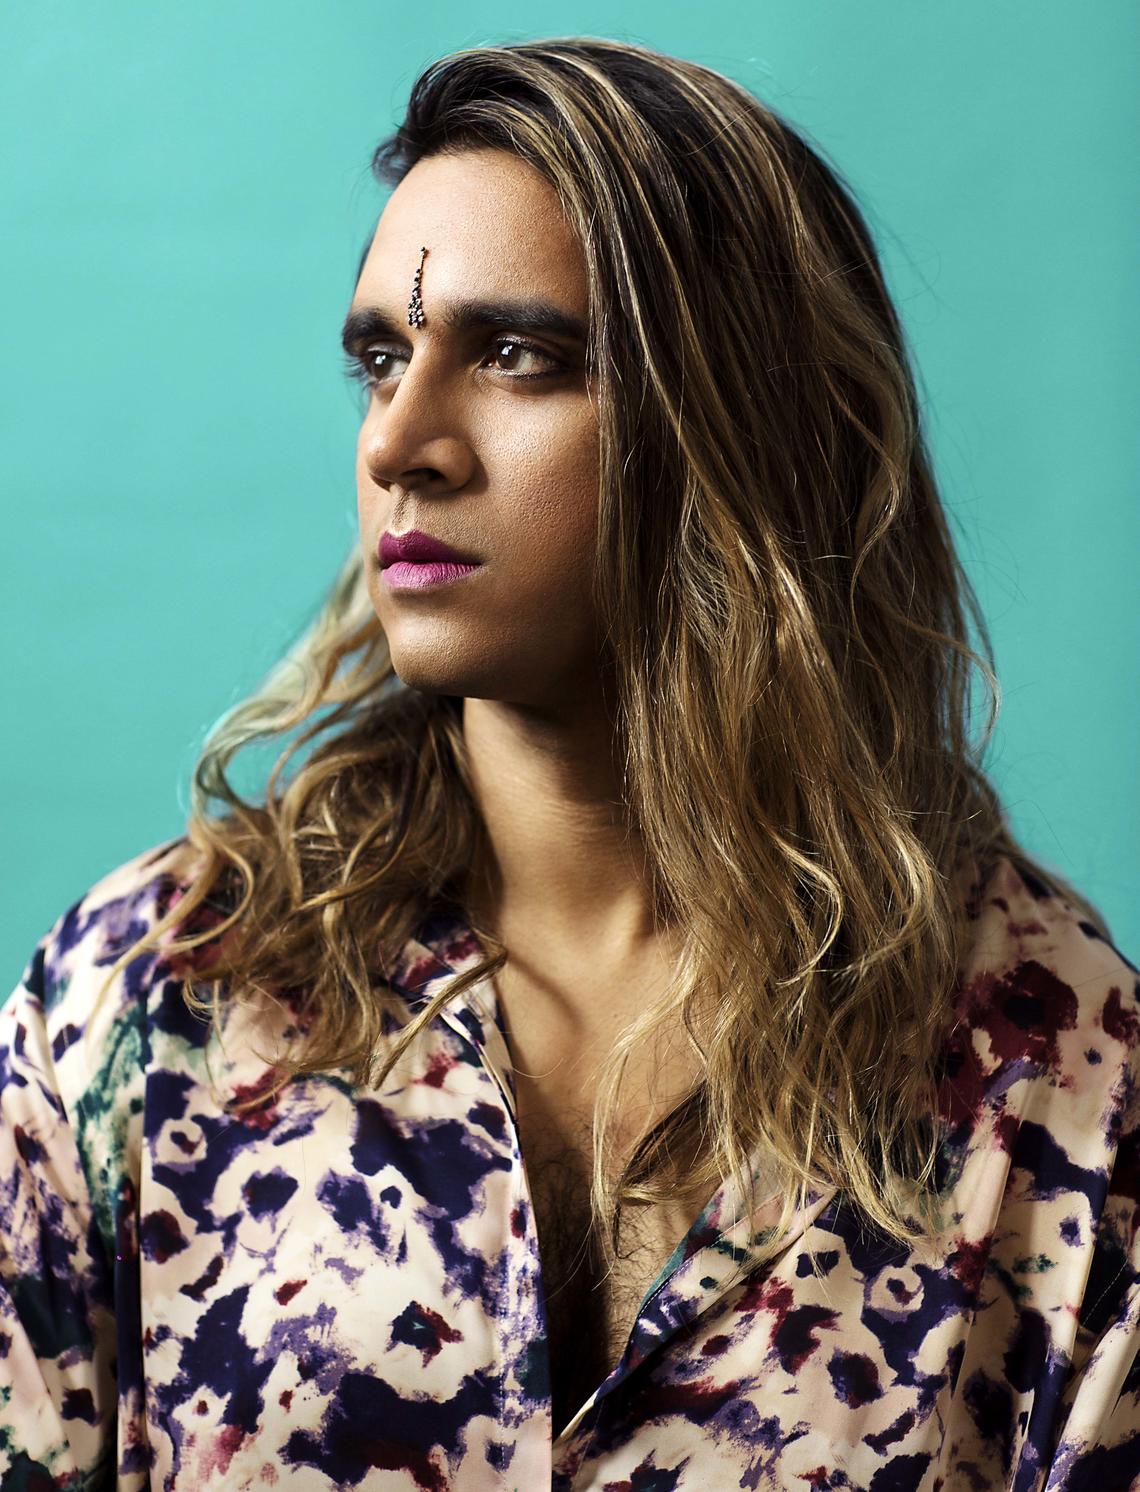 Vivek Shraya calls for more conversations about queerness following the International Day Against Homophobia, Transphobia and Biphobia on May 17.